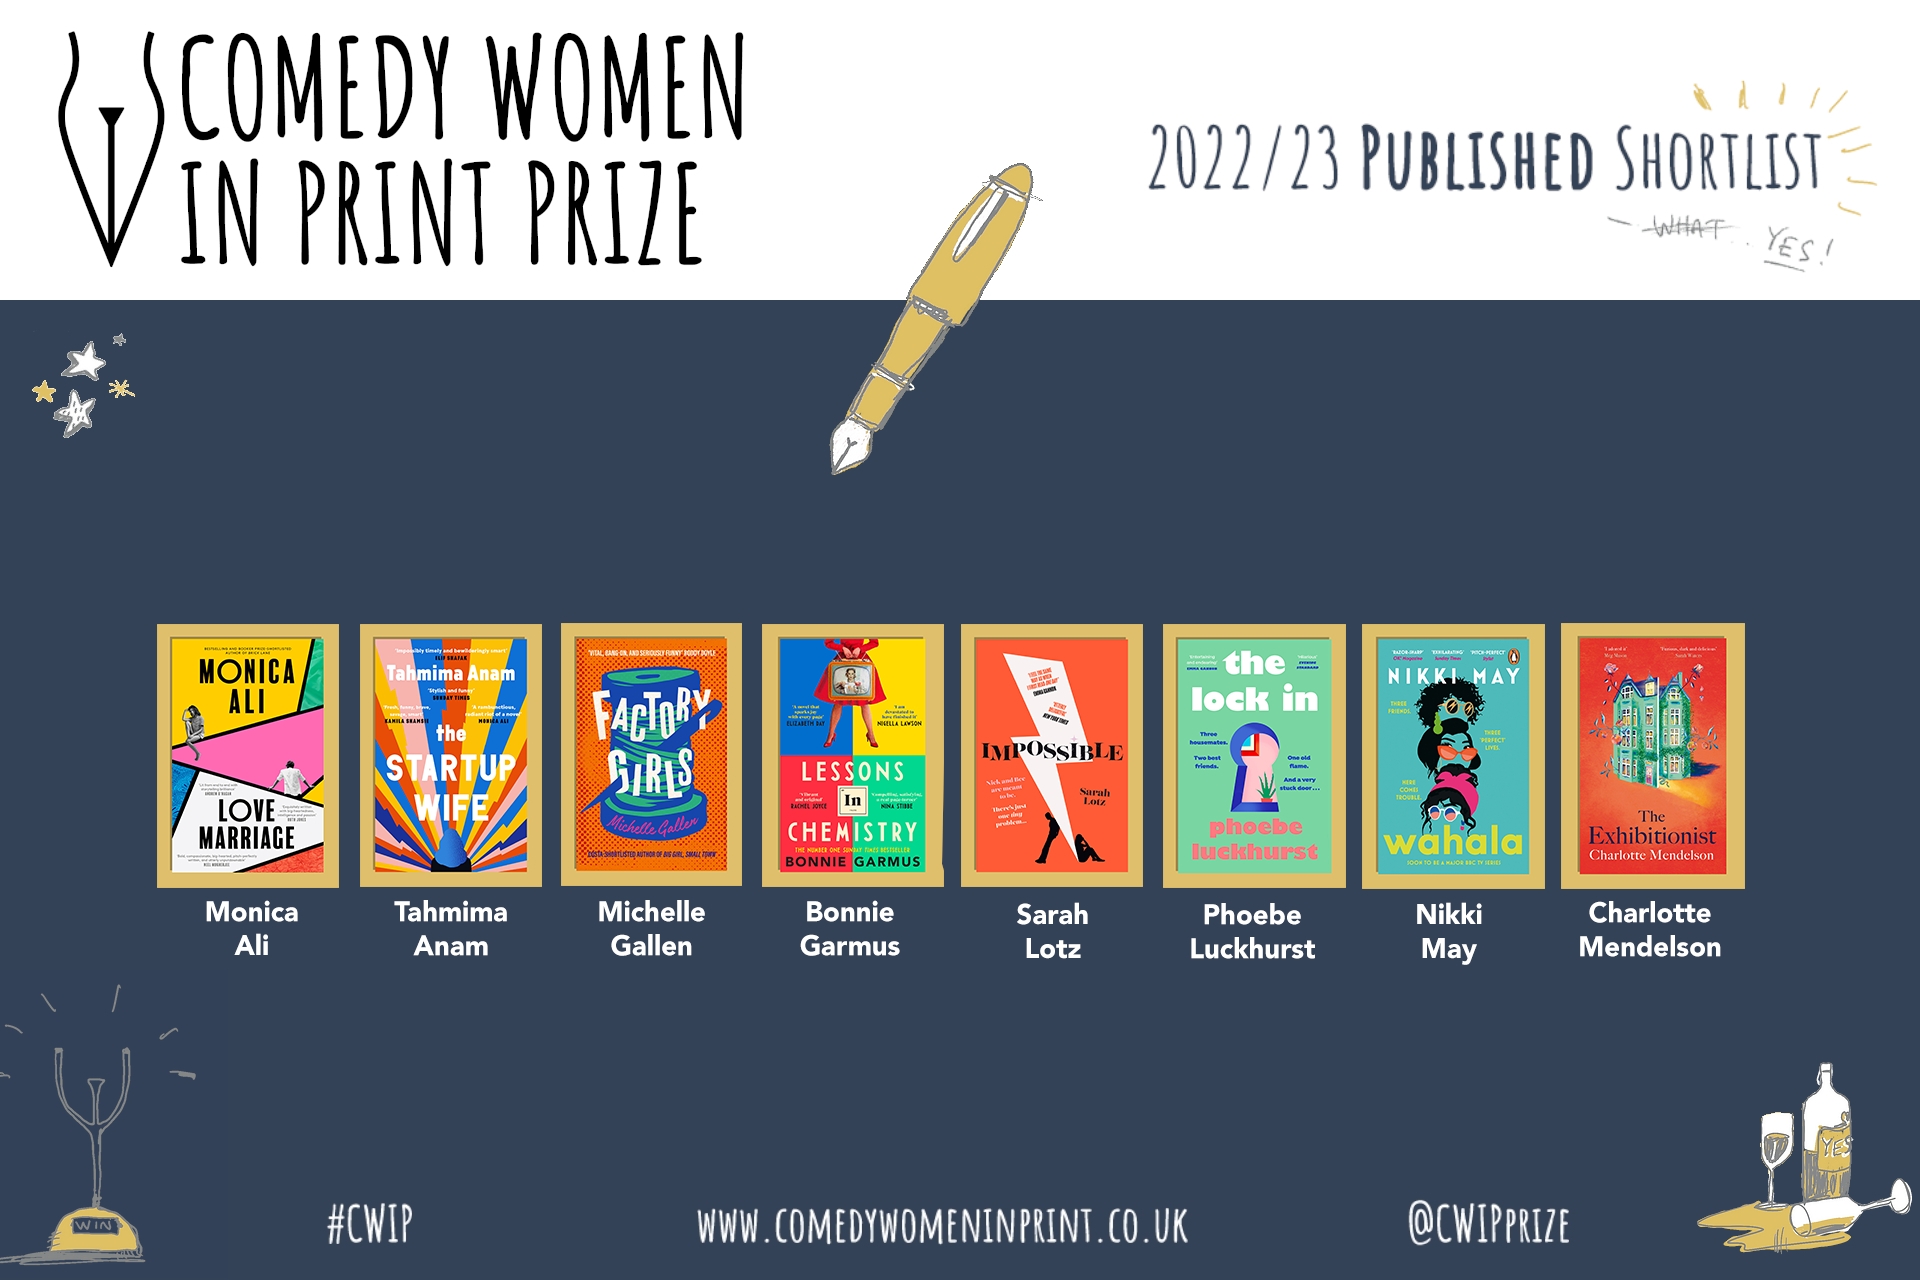 Bold and Fresh Voices Dominate This Year's Comedy Women in Print (CWIP) Prize Shortlist